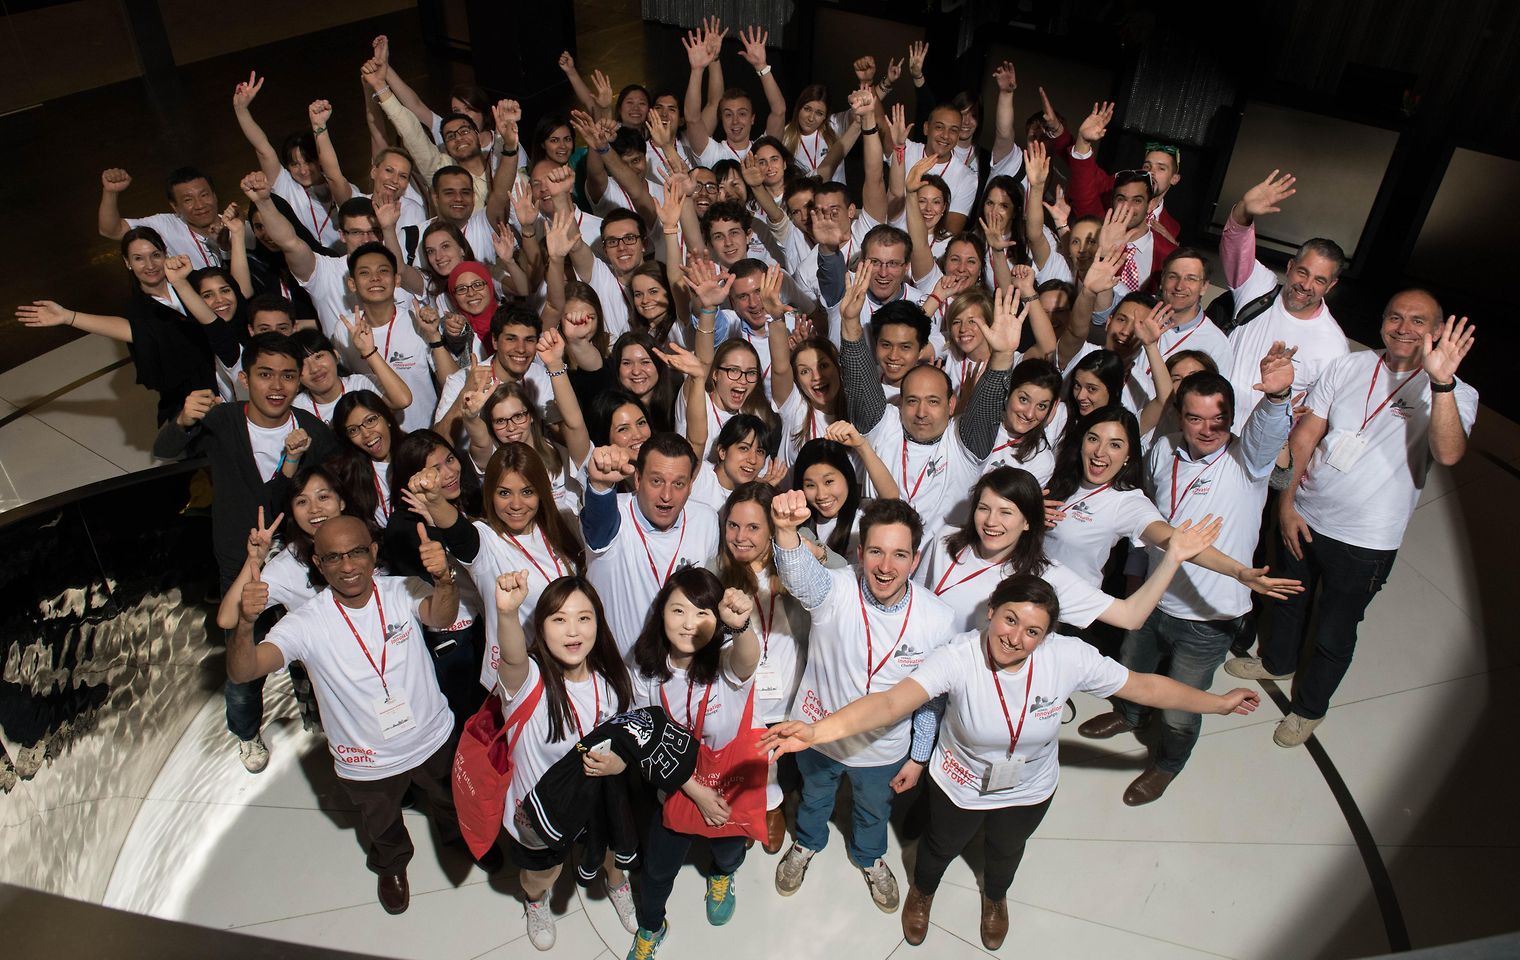 Student teams from 23 countries participated at the final of the Henkel Innovation Challenge in Vienna